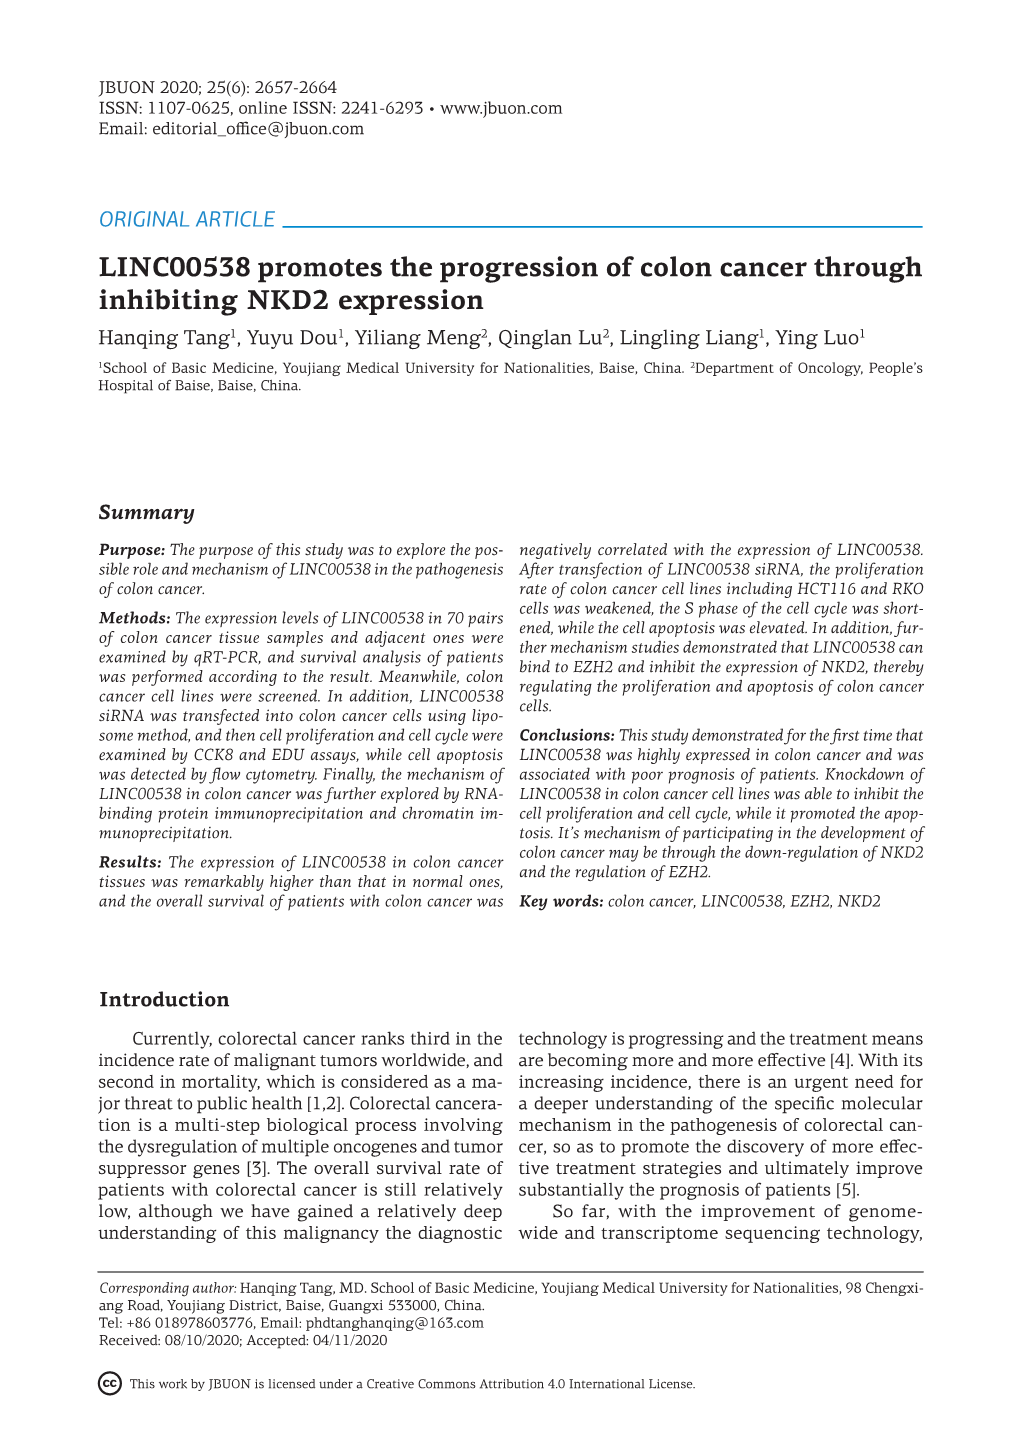 LINC00538 Promotes the Progression of Colon Cancer Through Inhibiting